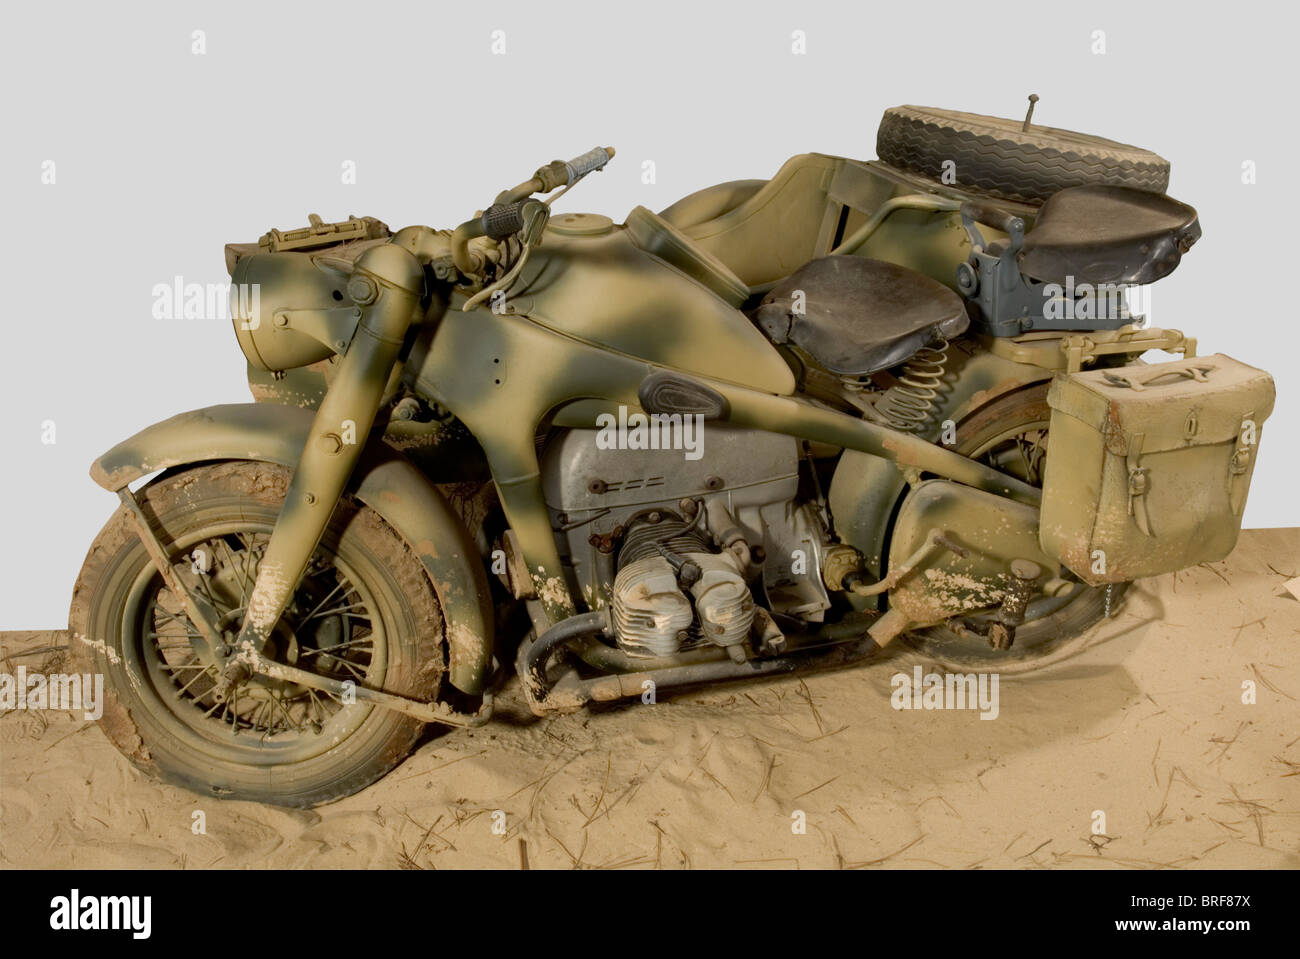 A Zündapp K750 with side-car "Steib", Very good condition and presentation  without any trace of corrosion visible. Beige colour with "Normandie"  camouflage. Incomplete motorcycle, to be restored. Engine not jammed, but  not